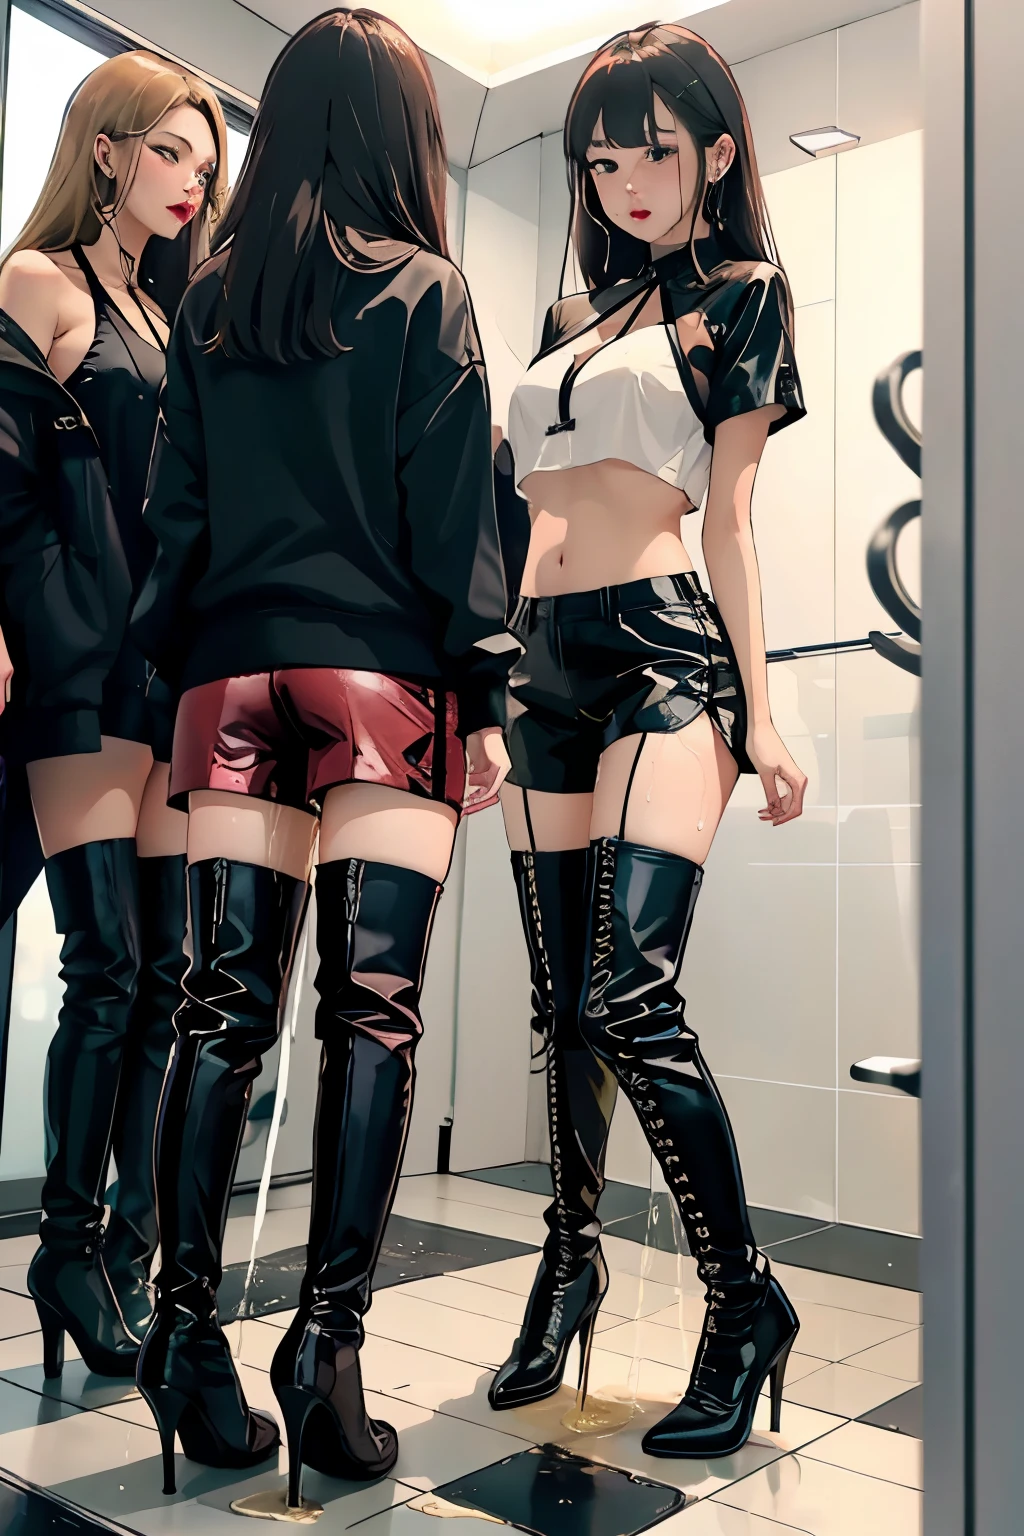 highres, beautiful women, high detail, good lighting, lewd, hentai, (((bike shorts))), (leather halter top), (bare midriff), (cameltoe), (((leather thigh high heel boots))), (wet shorts), (((wetting herself))), (((peeing herself))), (((peeing self))), (pee streaming down legs), peeing stain, (puddle), (thick thighs), nice long legs, lipstick, detailed face, pretty face, humiliated, embarrassed, ((waiting for bathroom with line of women in queue)), hihelz